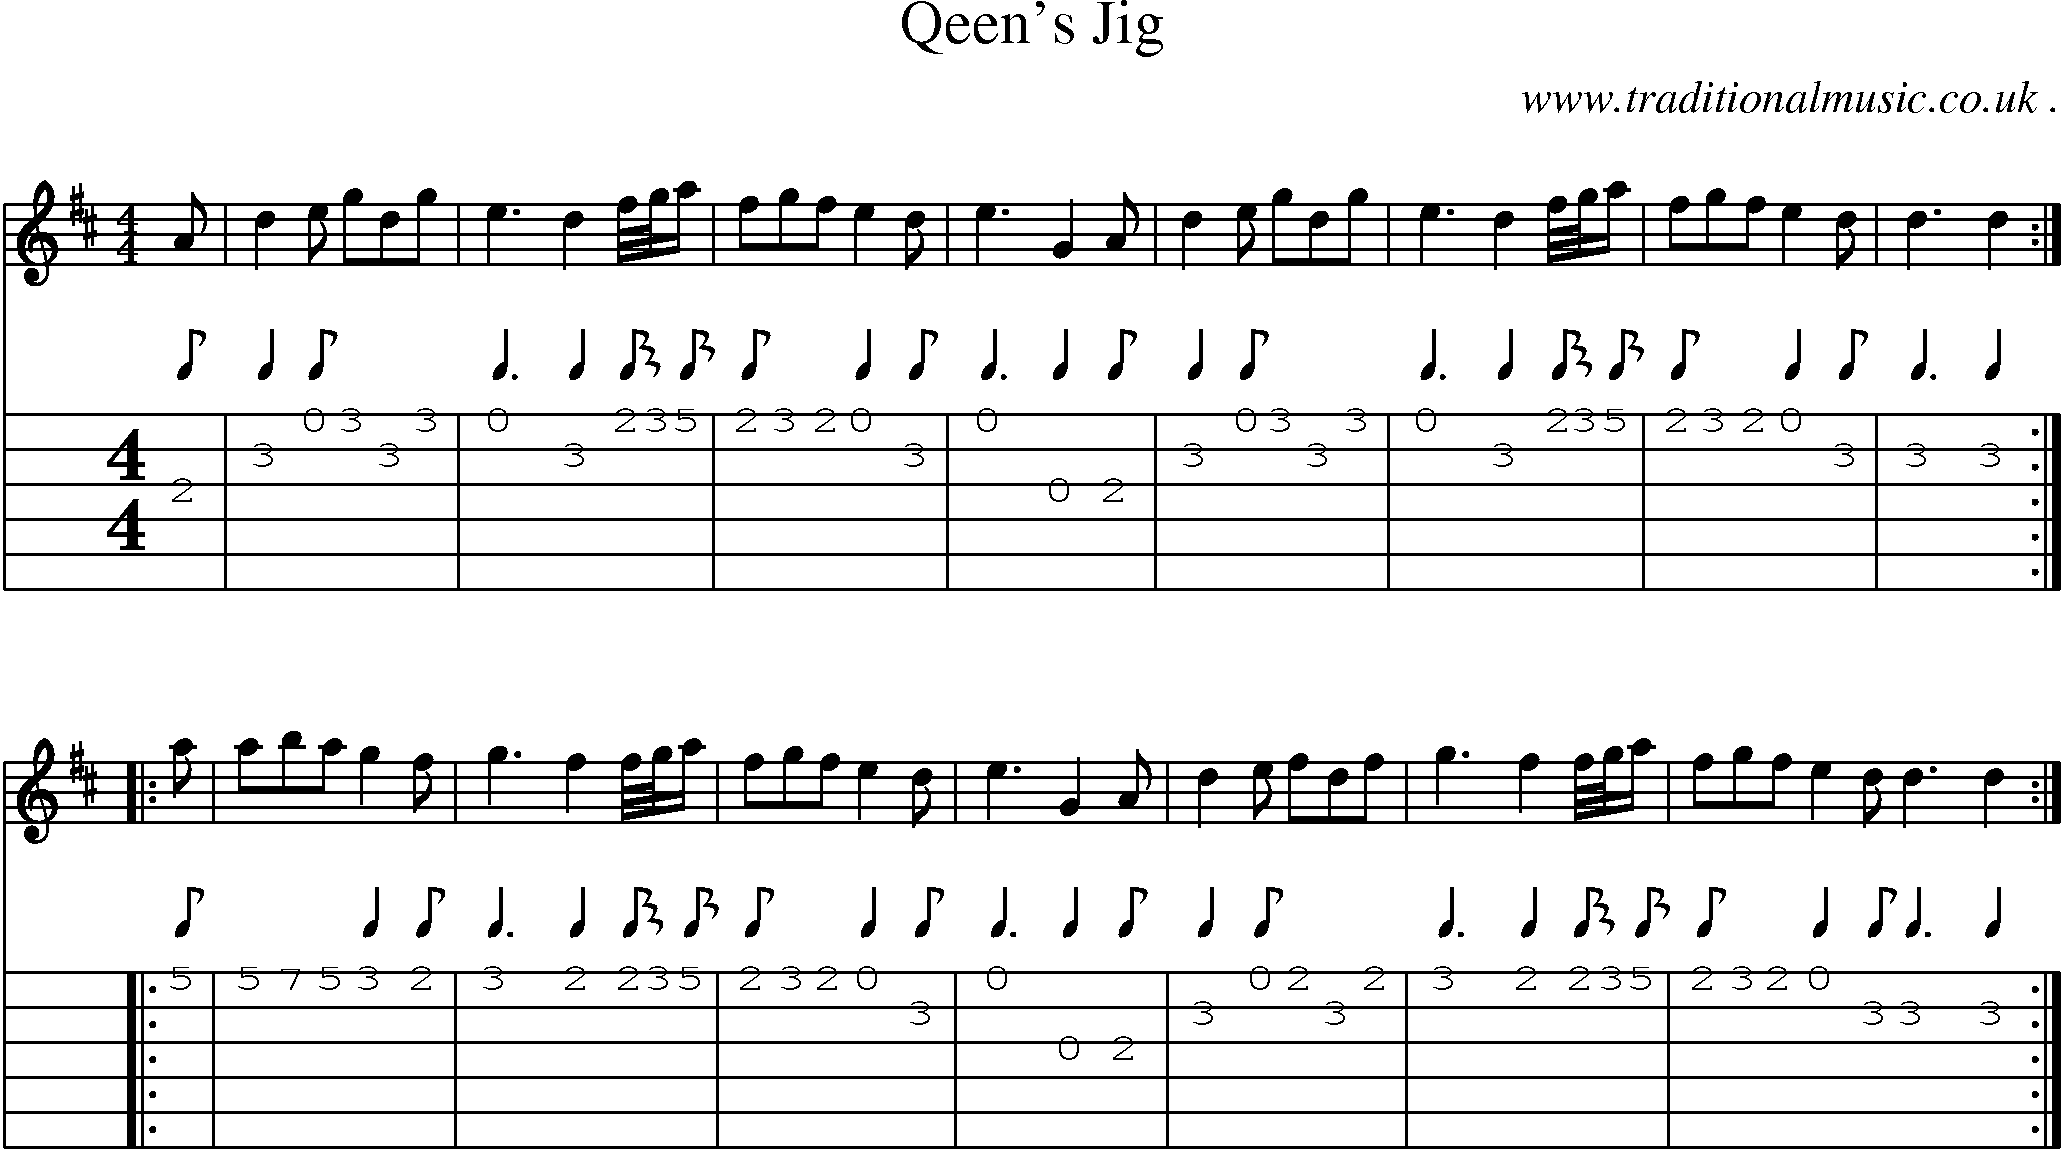 Sheet-Music and Guitar Tabs for Qeens Jig